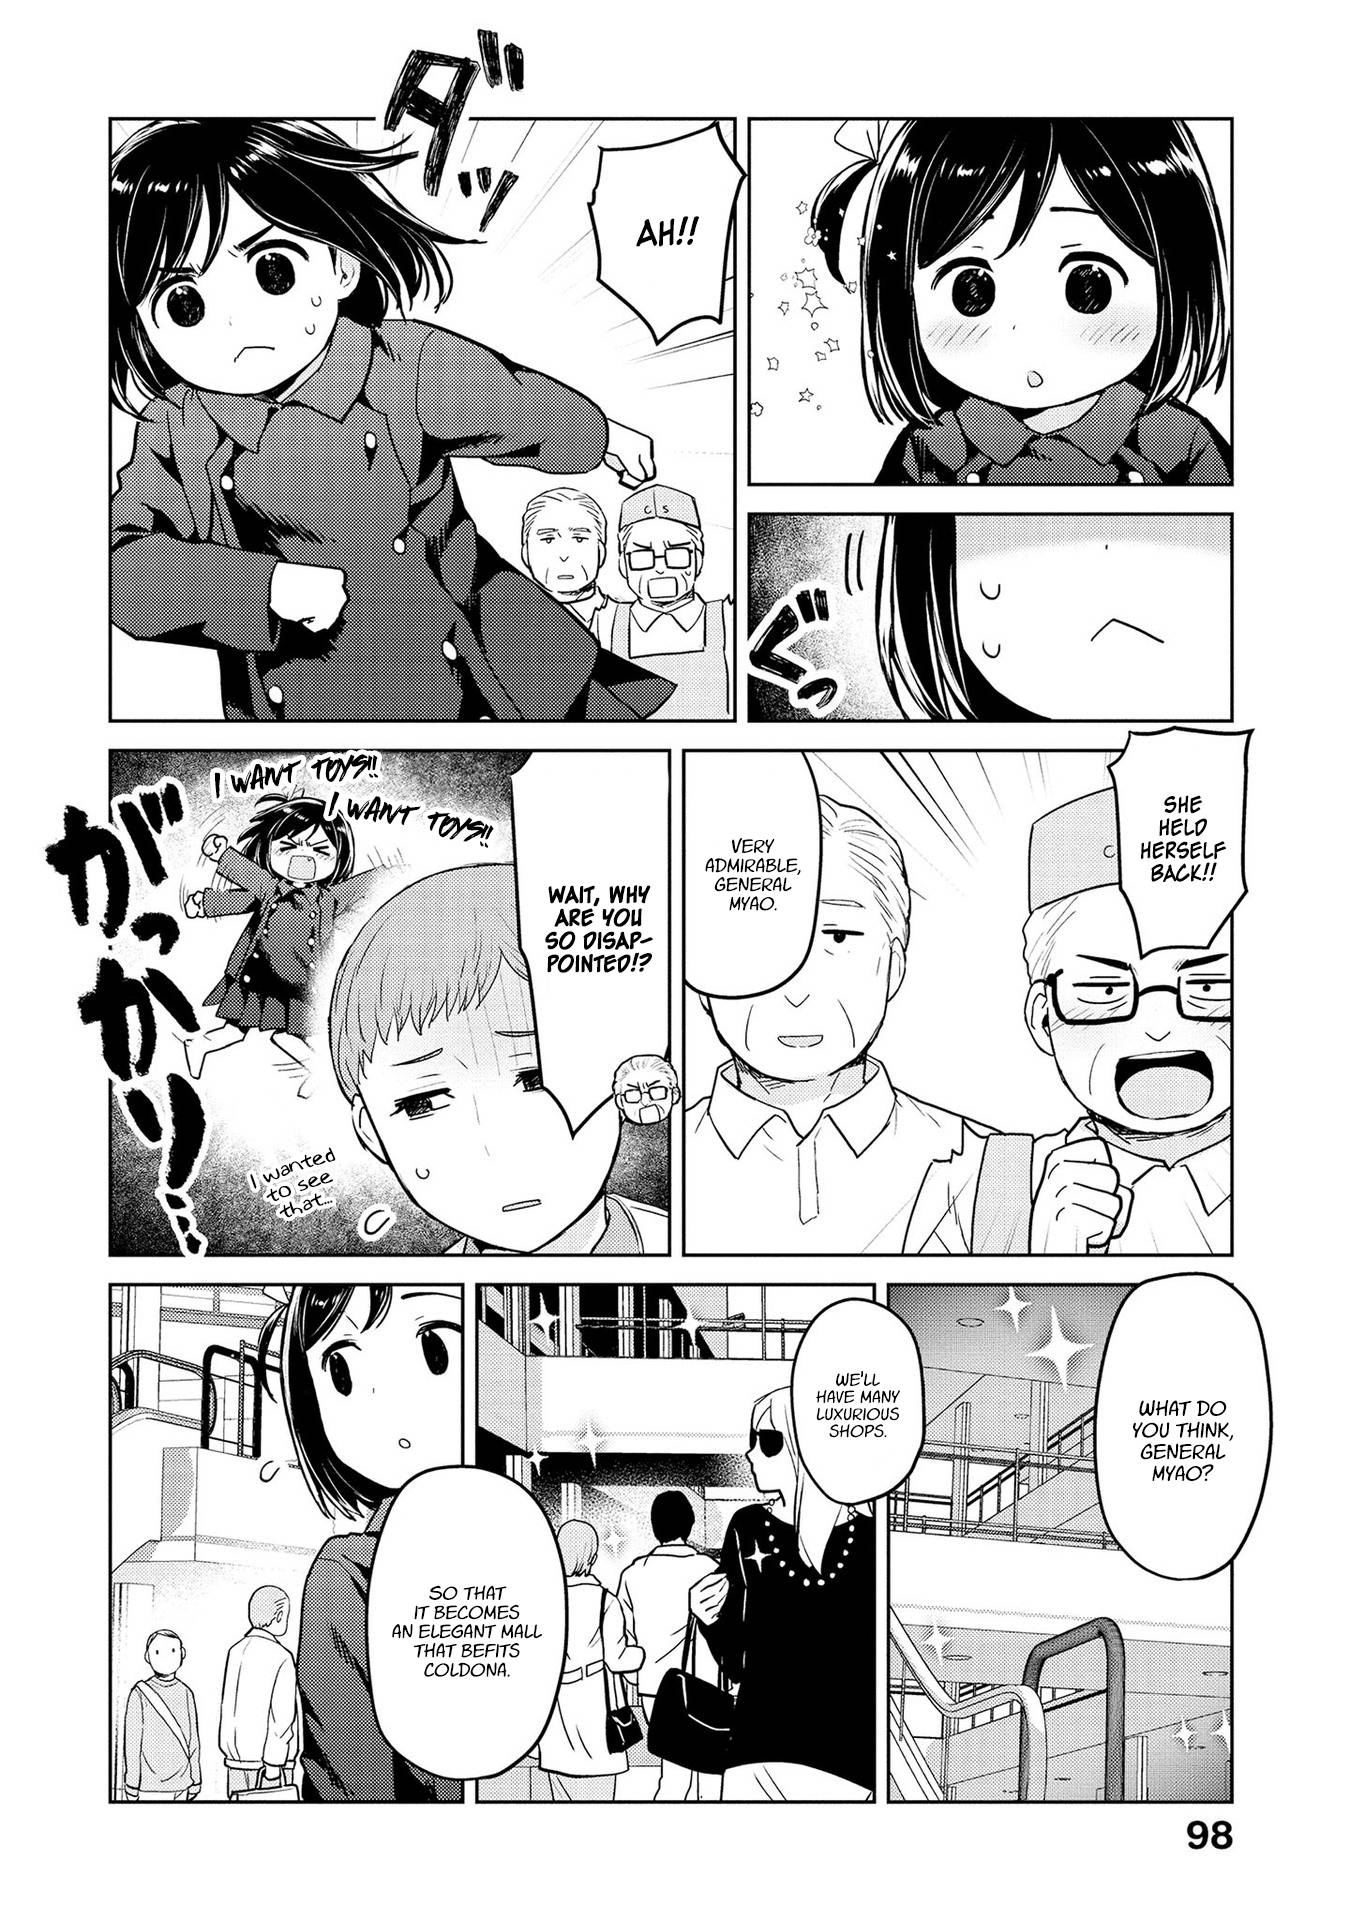 Oh, Our General Myao - chapter 34 - #6